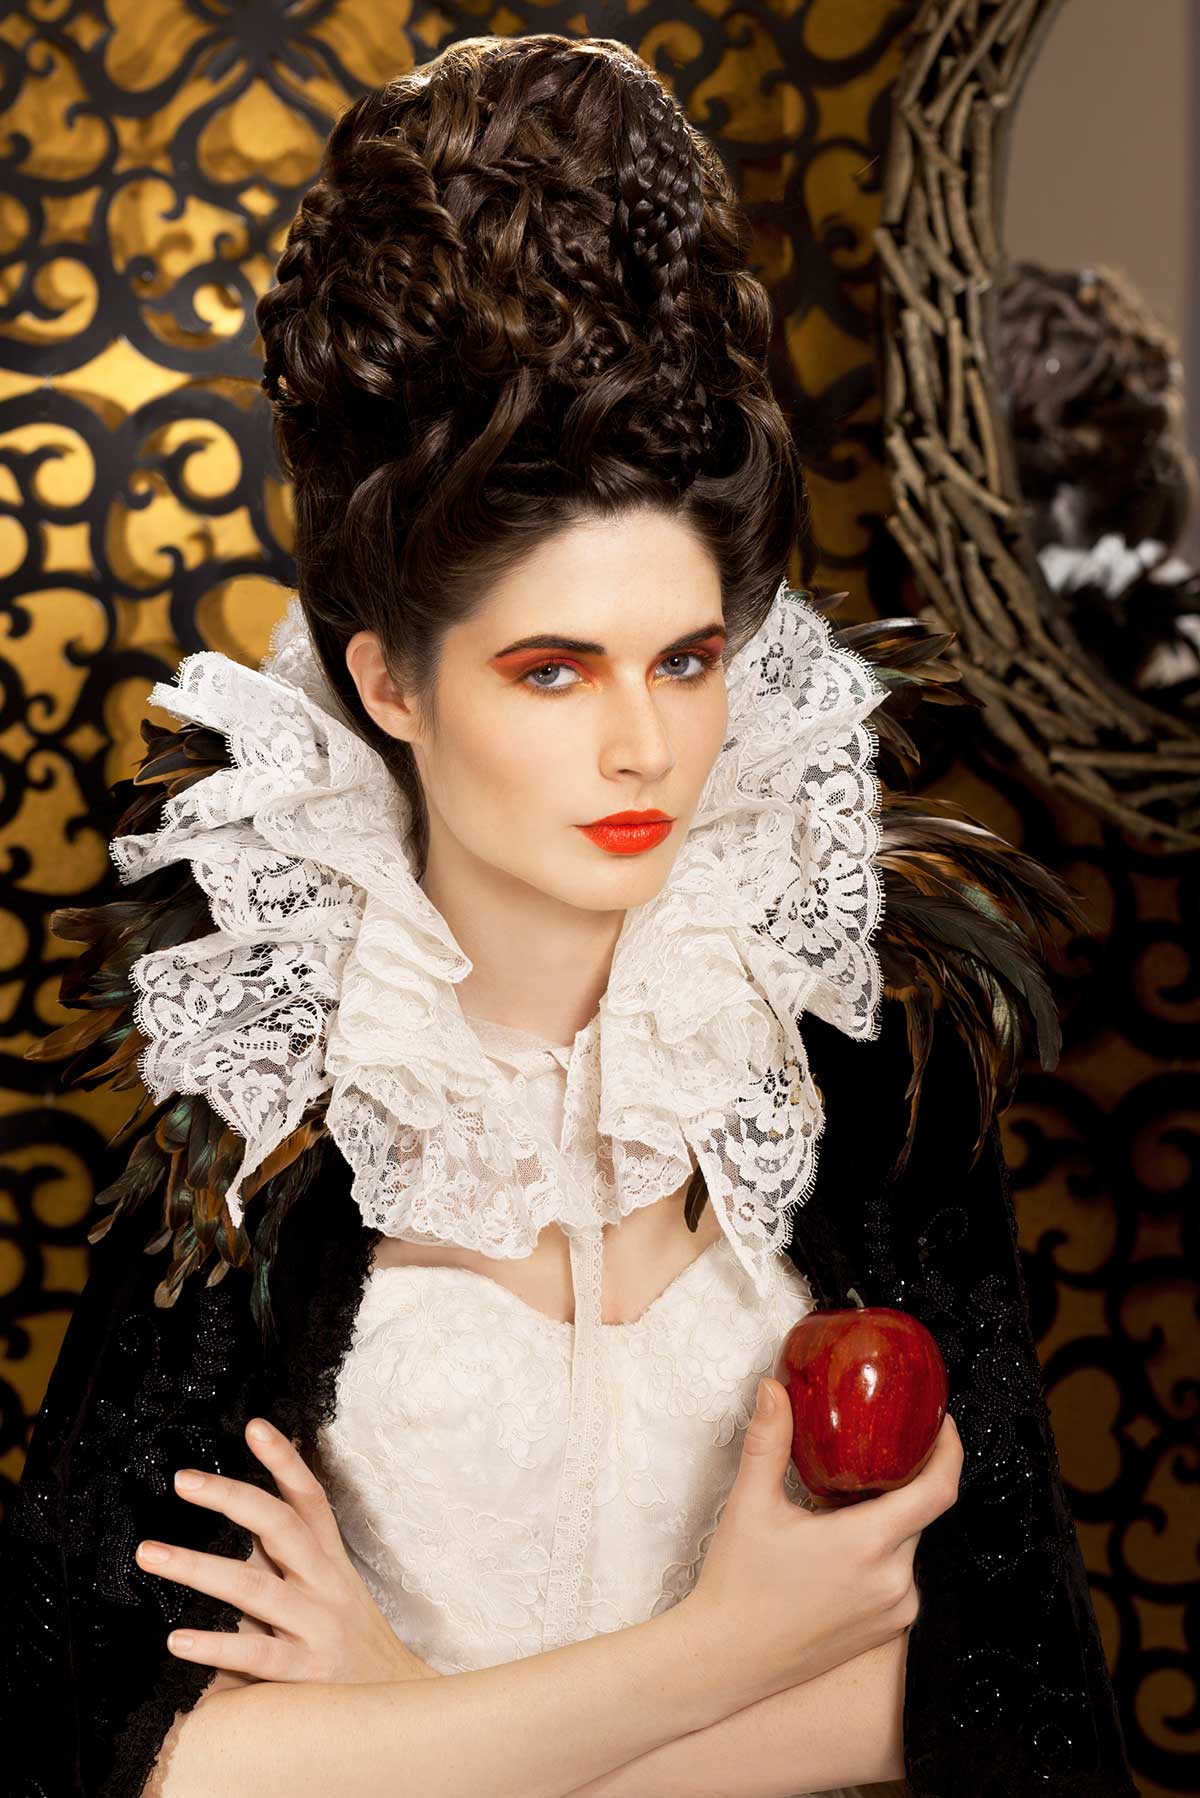 EVIL QUEEN | Constance McCardle Fashion Design | Photography: Jean Sweet